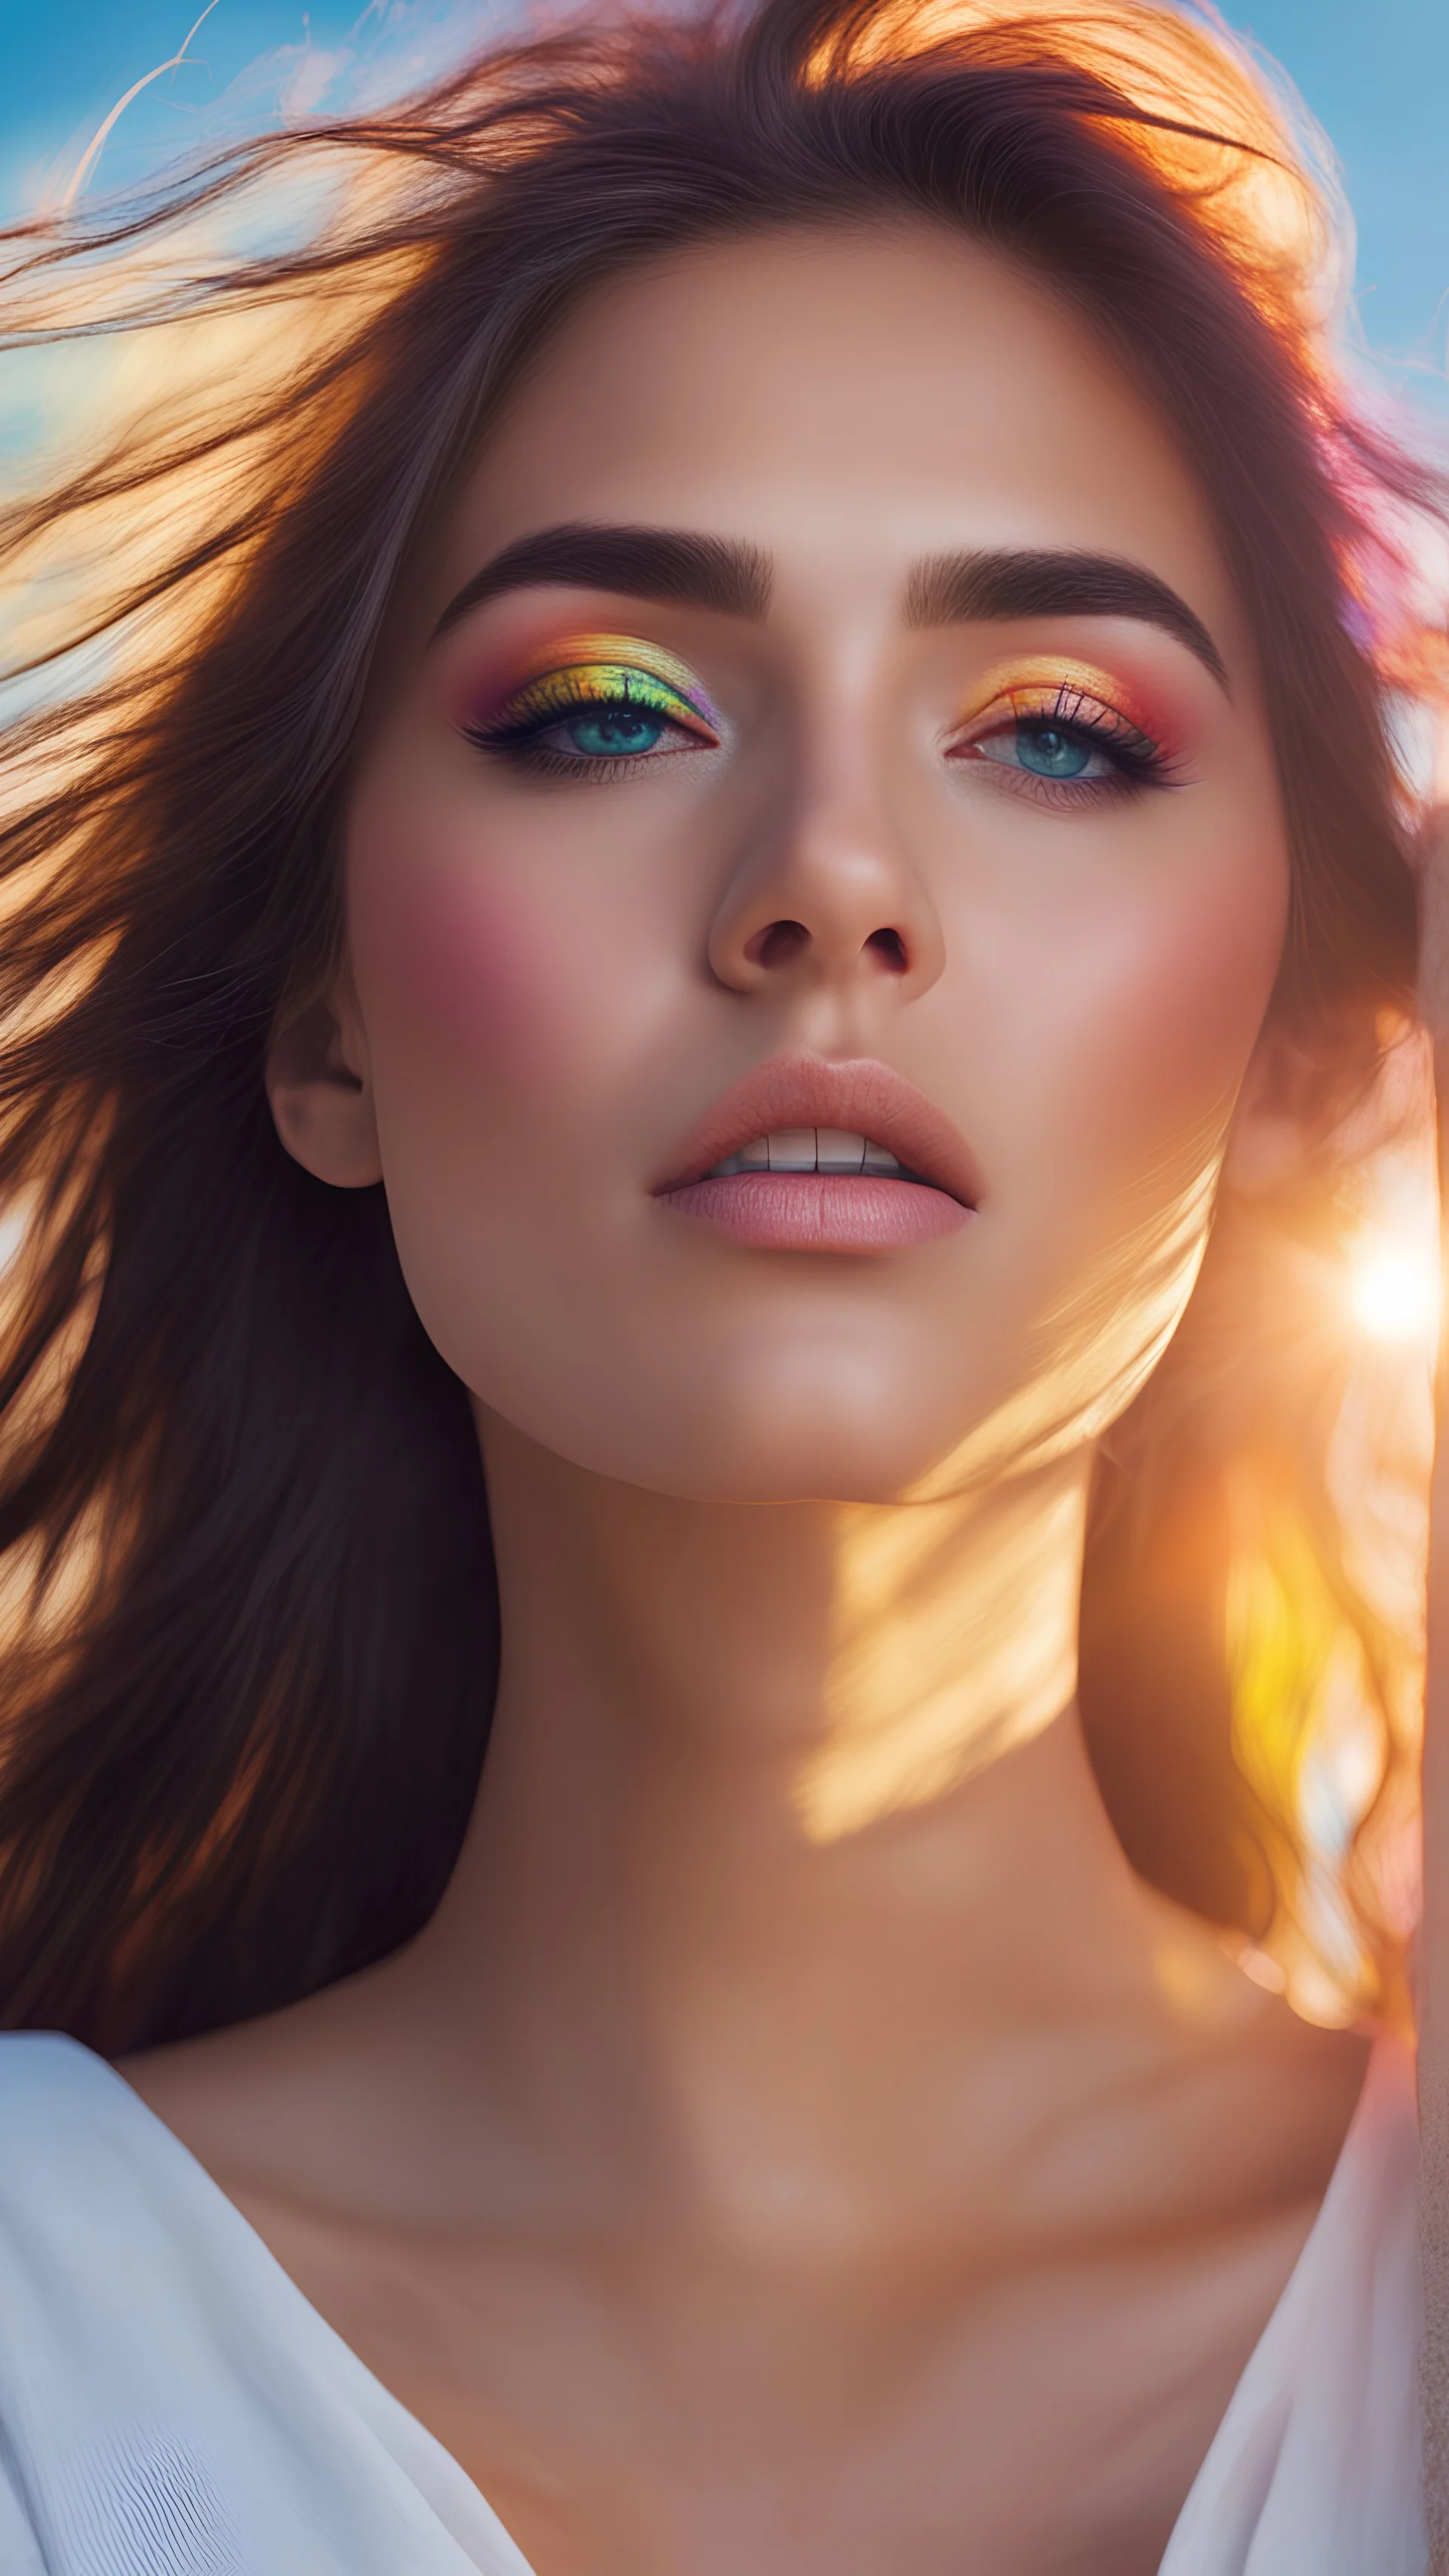 art of a beautiful girl just awake from sleep and the sun after her, 4k colors. real skin, looking at the sky, some rainbow